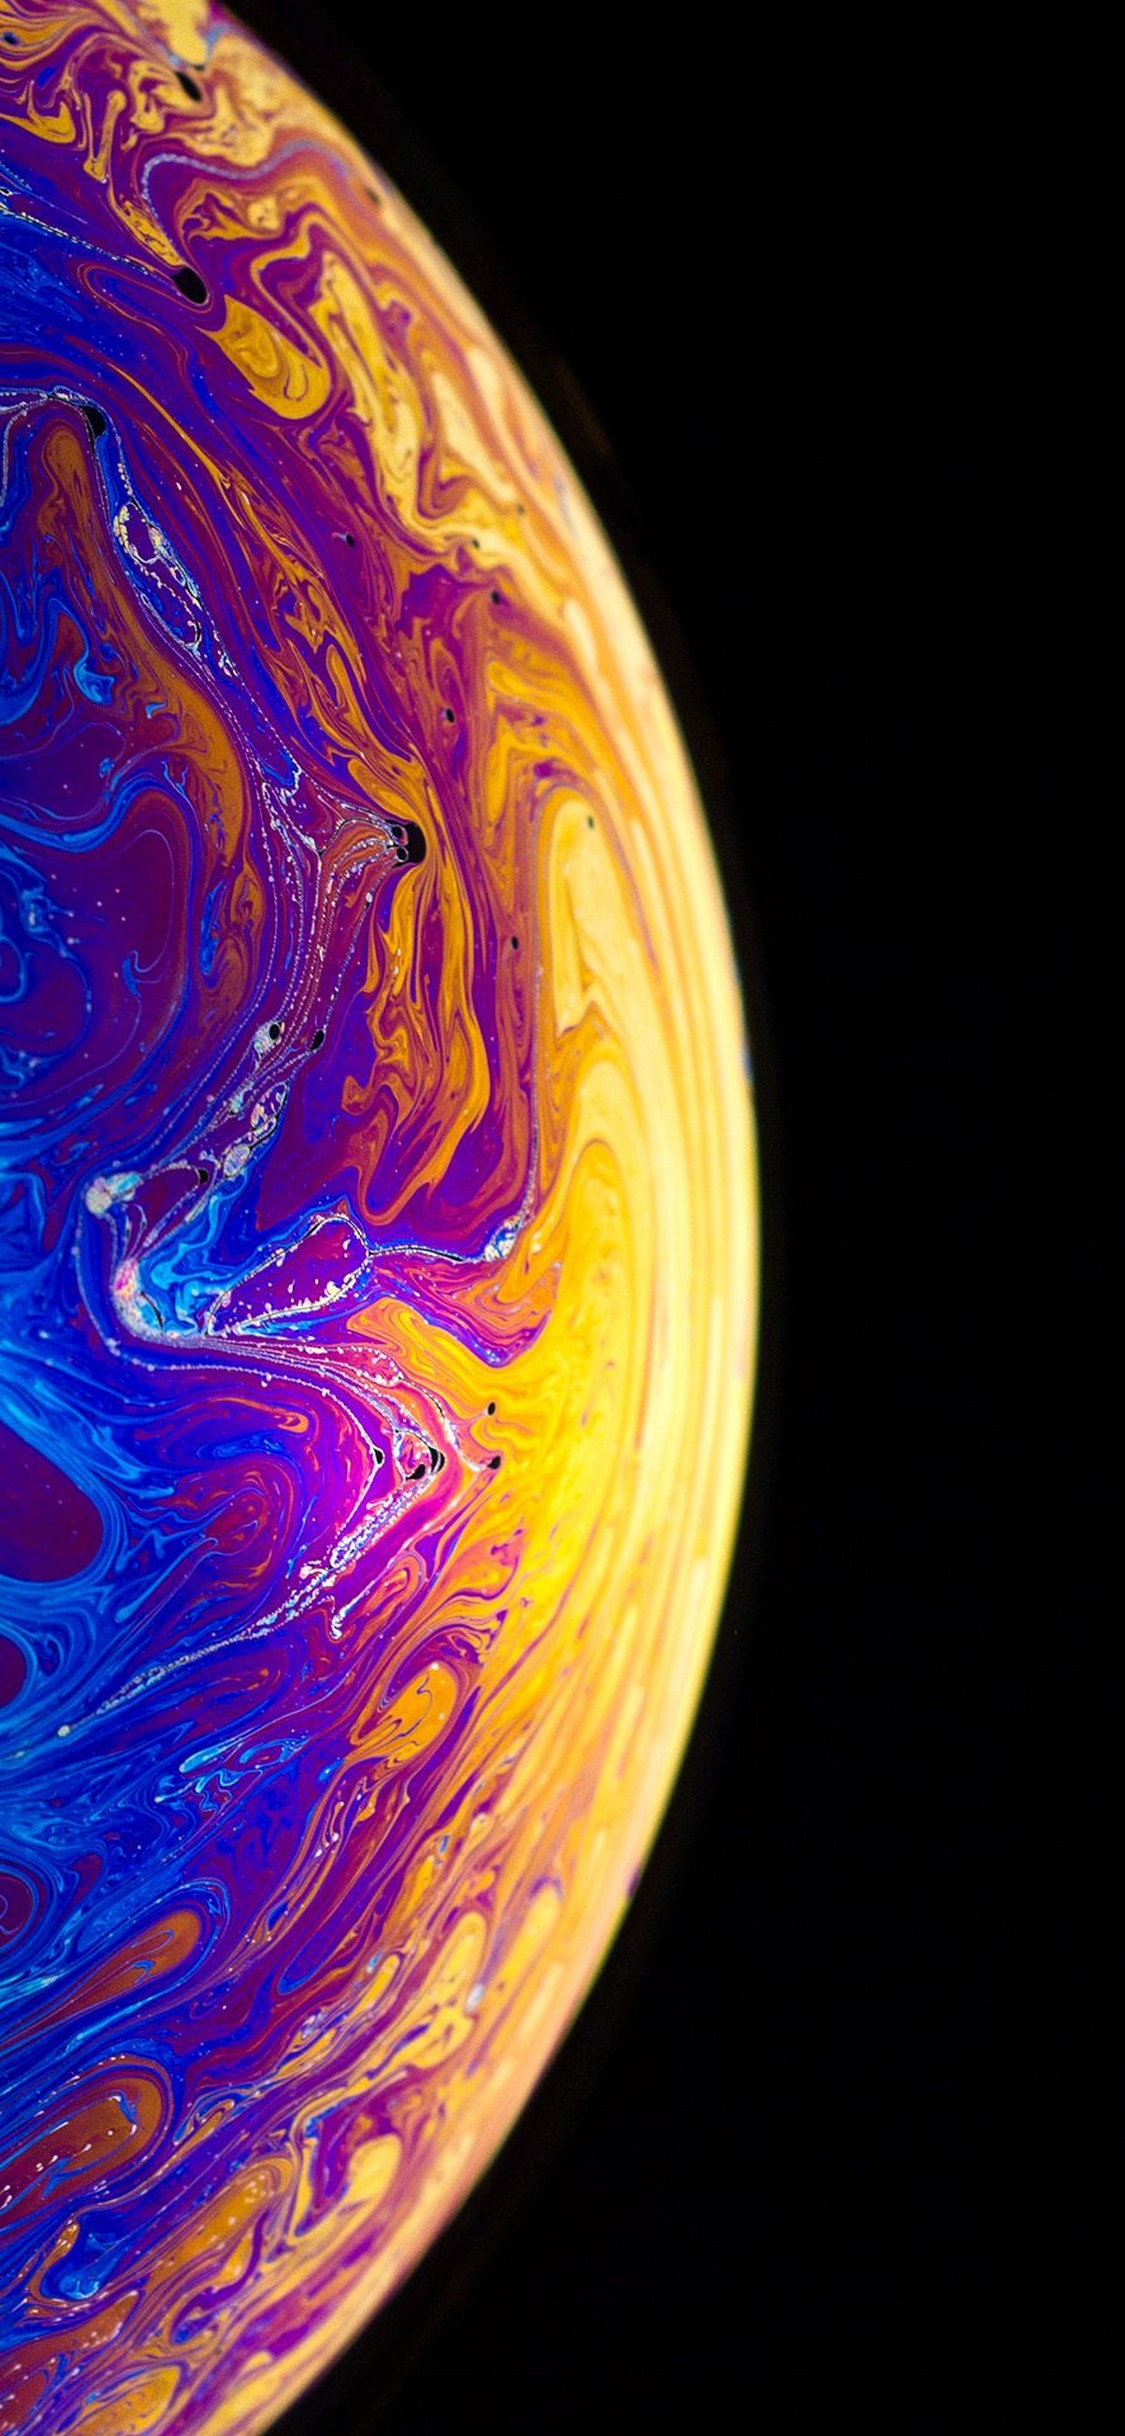 Wallpapers iPhone XS With high-resolution 1125X2436 pixel. You can set as wallpaper for Apple iPhone X, XS Max, XR, 8, 7, 6, SE, iPad. Enjoy and share your favorite HD wallpapers and background images